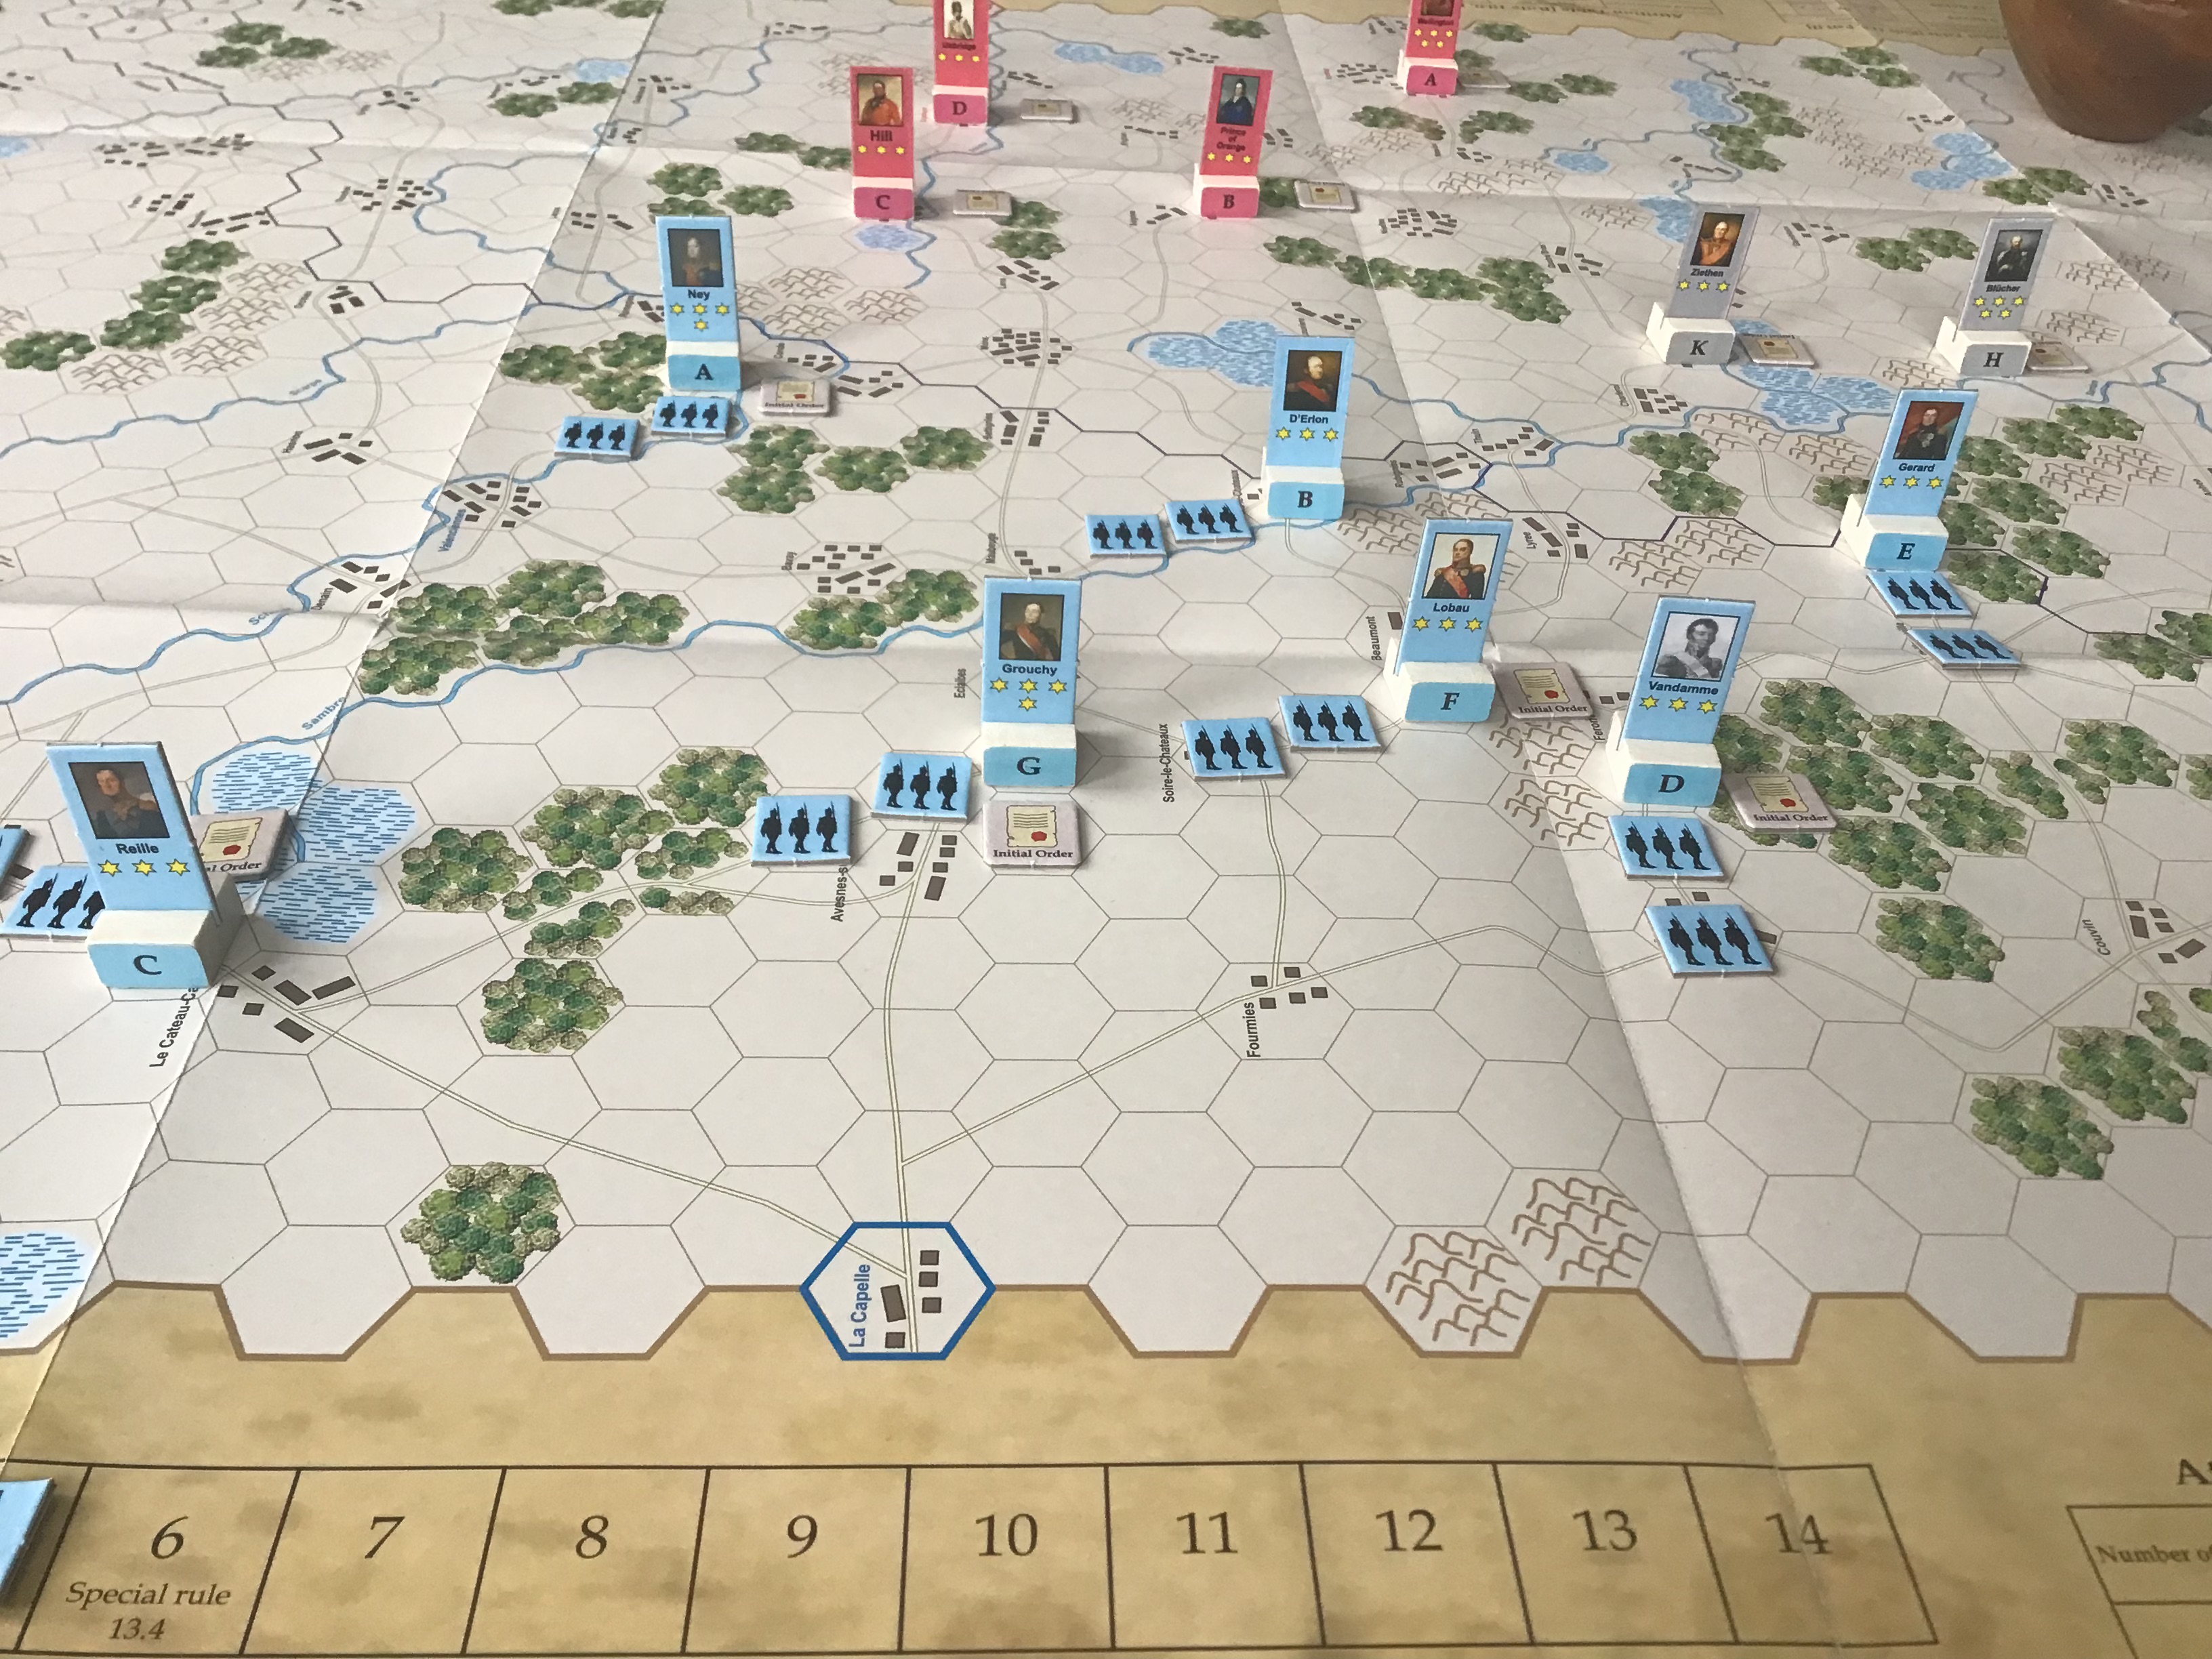 HEX: Victory Roads， Operation バッグration to the Fall Berl